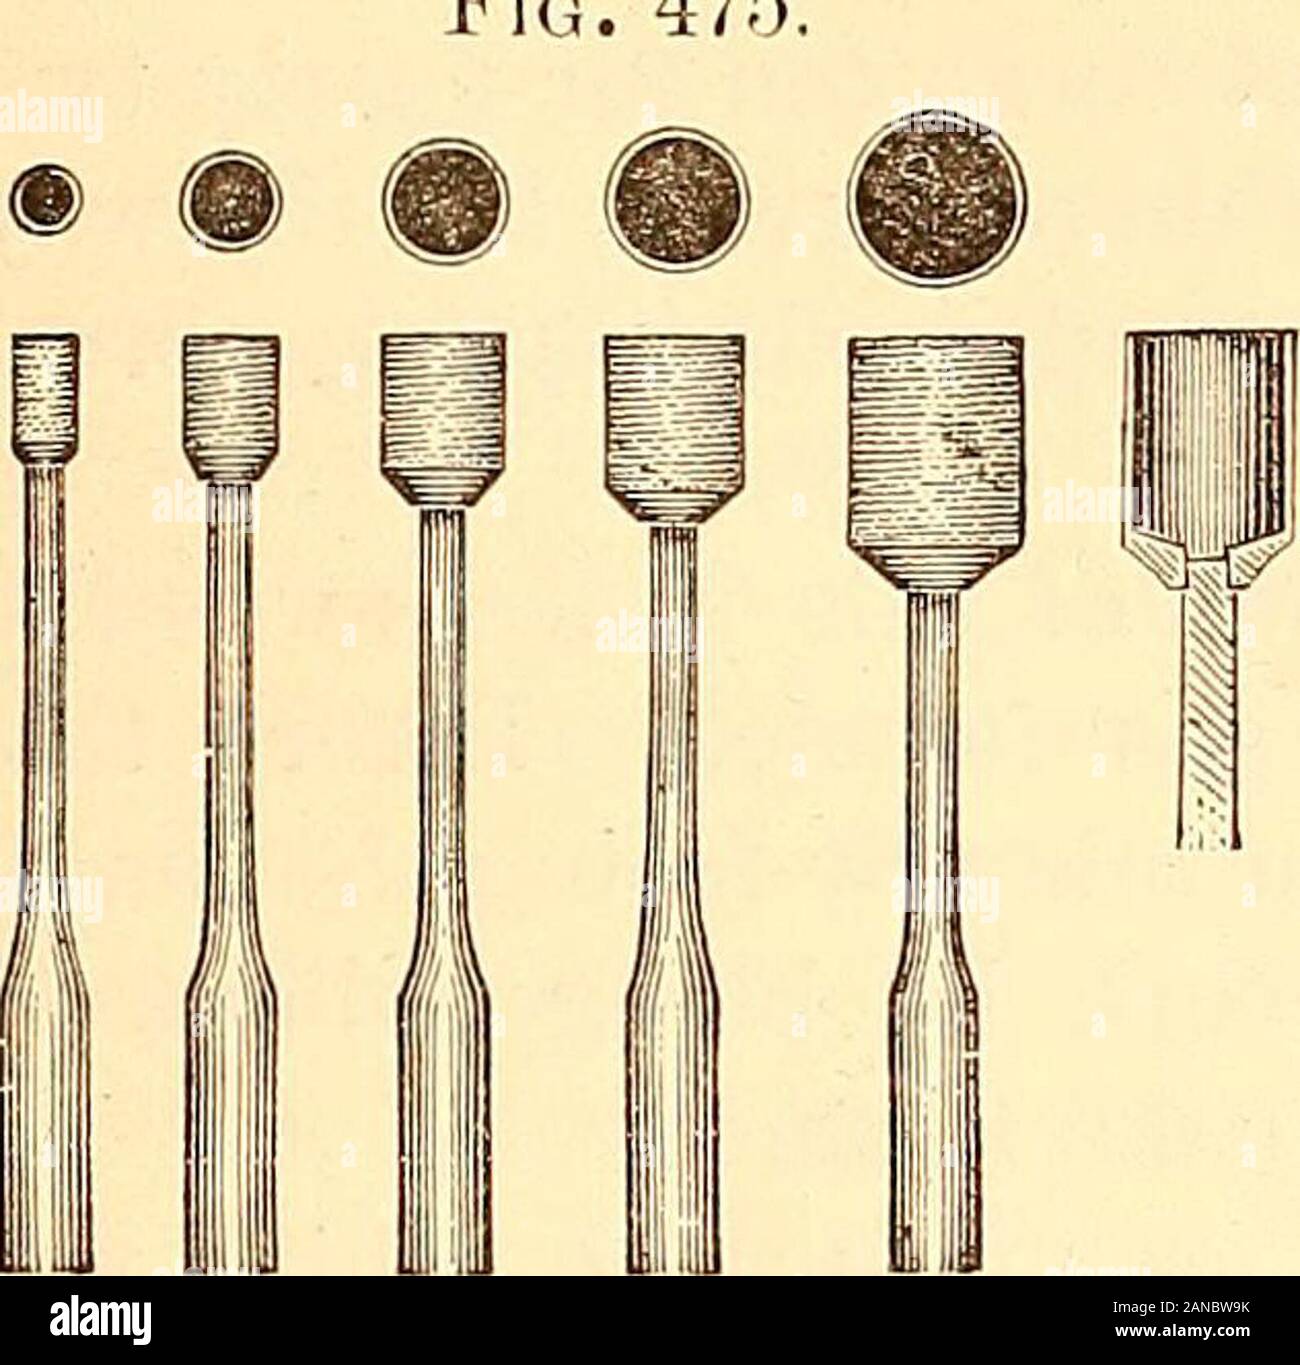 Principles and practice of operative dentistry . r. G. H. Weagant. which consistsof cutting inlays from artificial teeth or inlay rods (Fig. 474) by the aidof especially devised trephines of five different sizes (Fig. 475), made ofcopper and charged with diamond dust. These trephines are to be used in conjunction with Hows inlay burs(Fig. 476), which correspond in size to the trephines. After the decay has been removed from the cavity, a bur is selectedfrom the How set which will be large enough to include the utmost limitsof the cavity, and the final preparation of the cavity completed with i Stock Photo